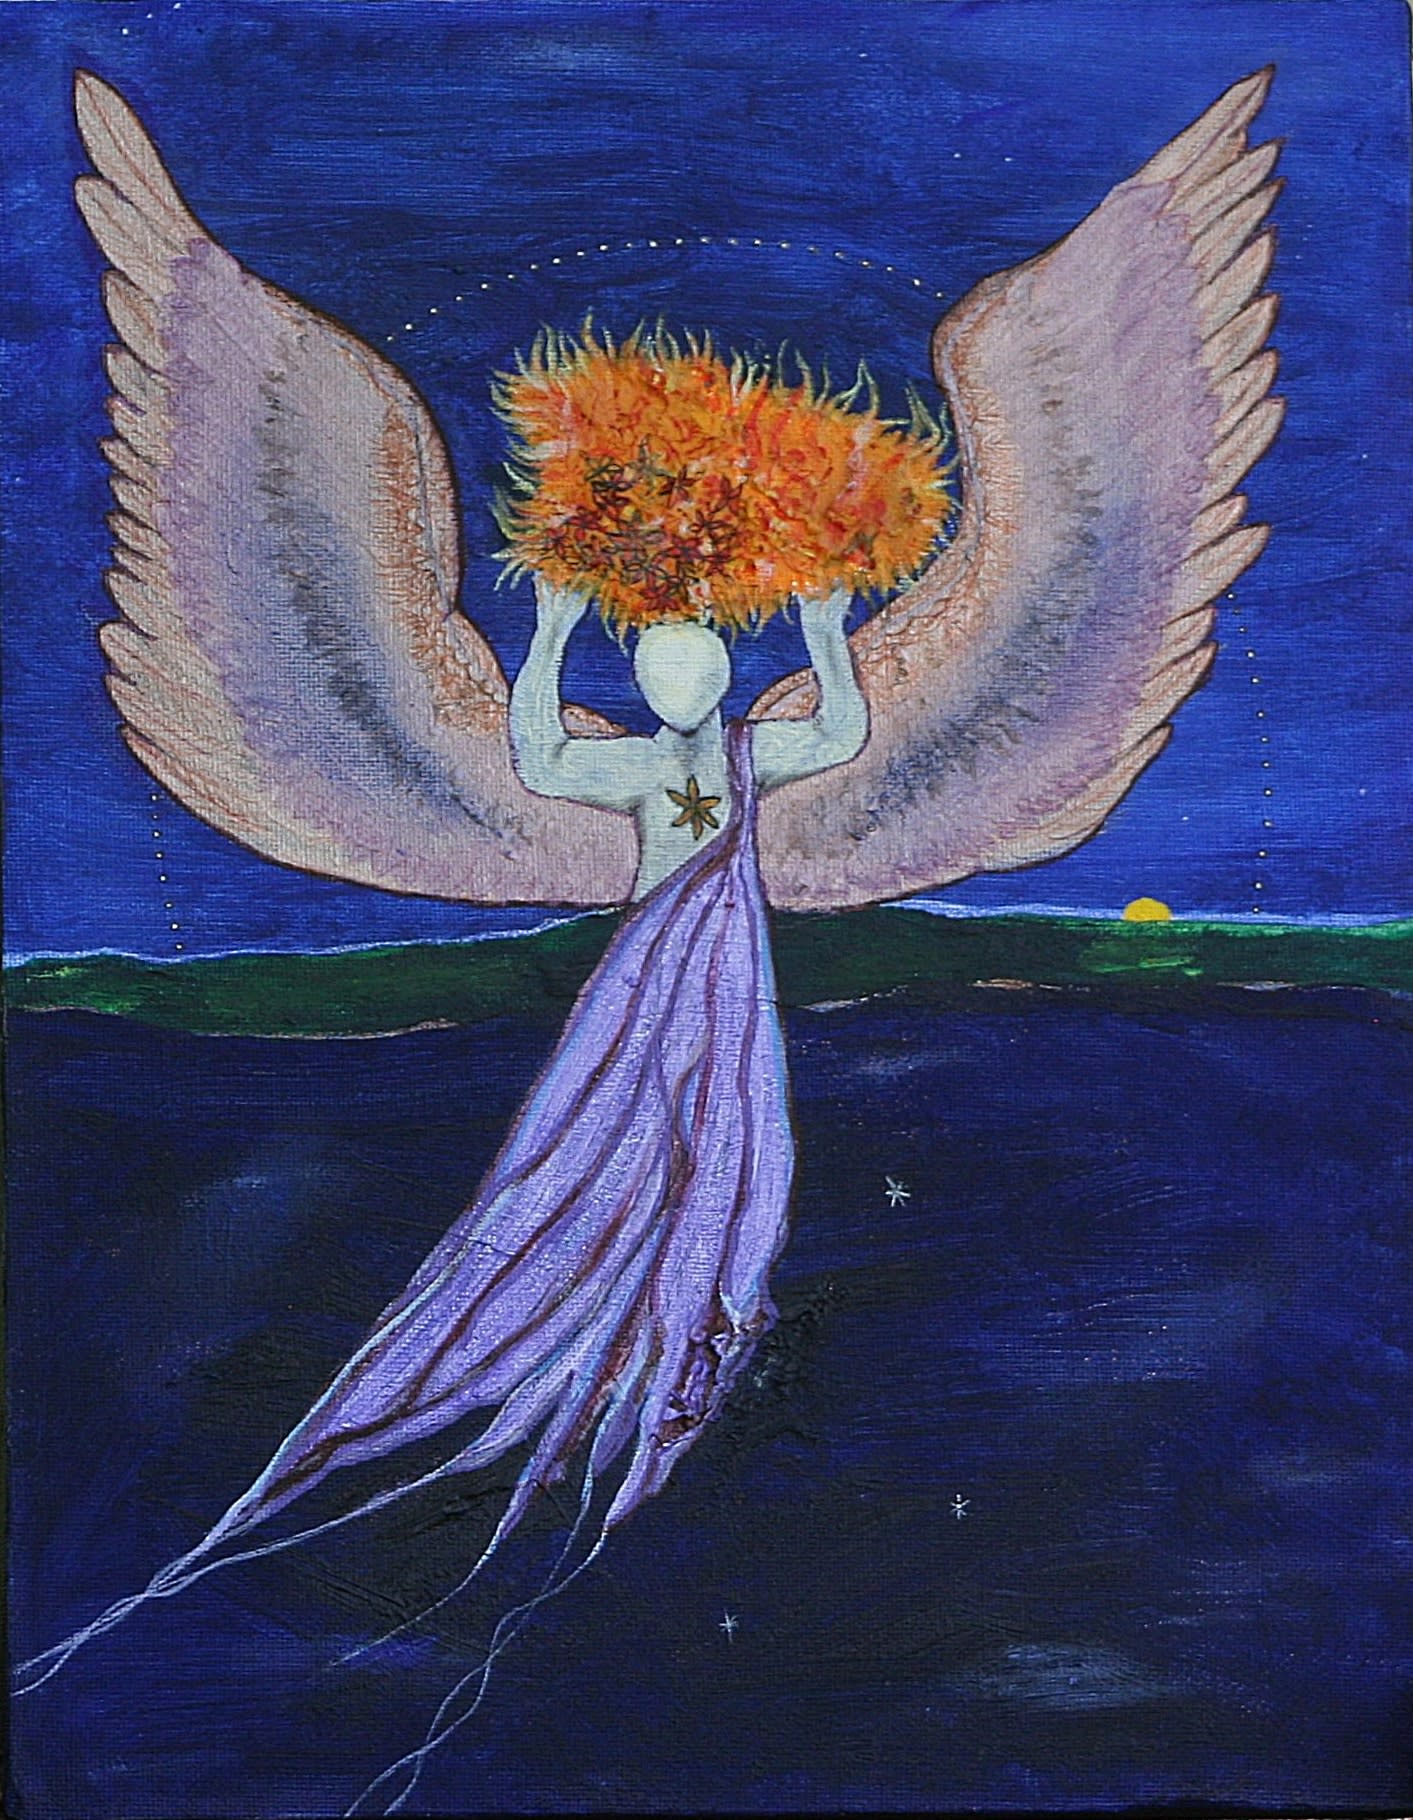 She brings fire perfect angel archangel celestial landscapes spirituality in art pz8c4t